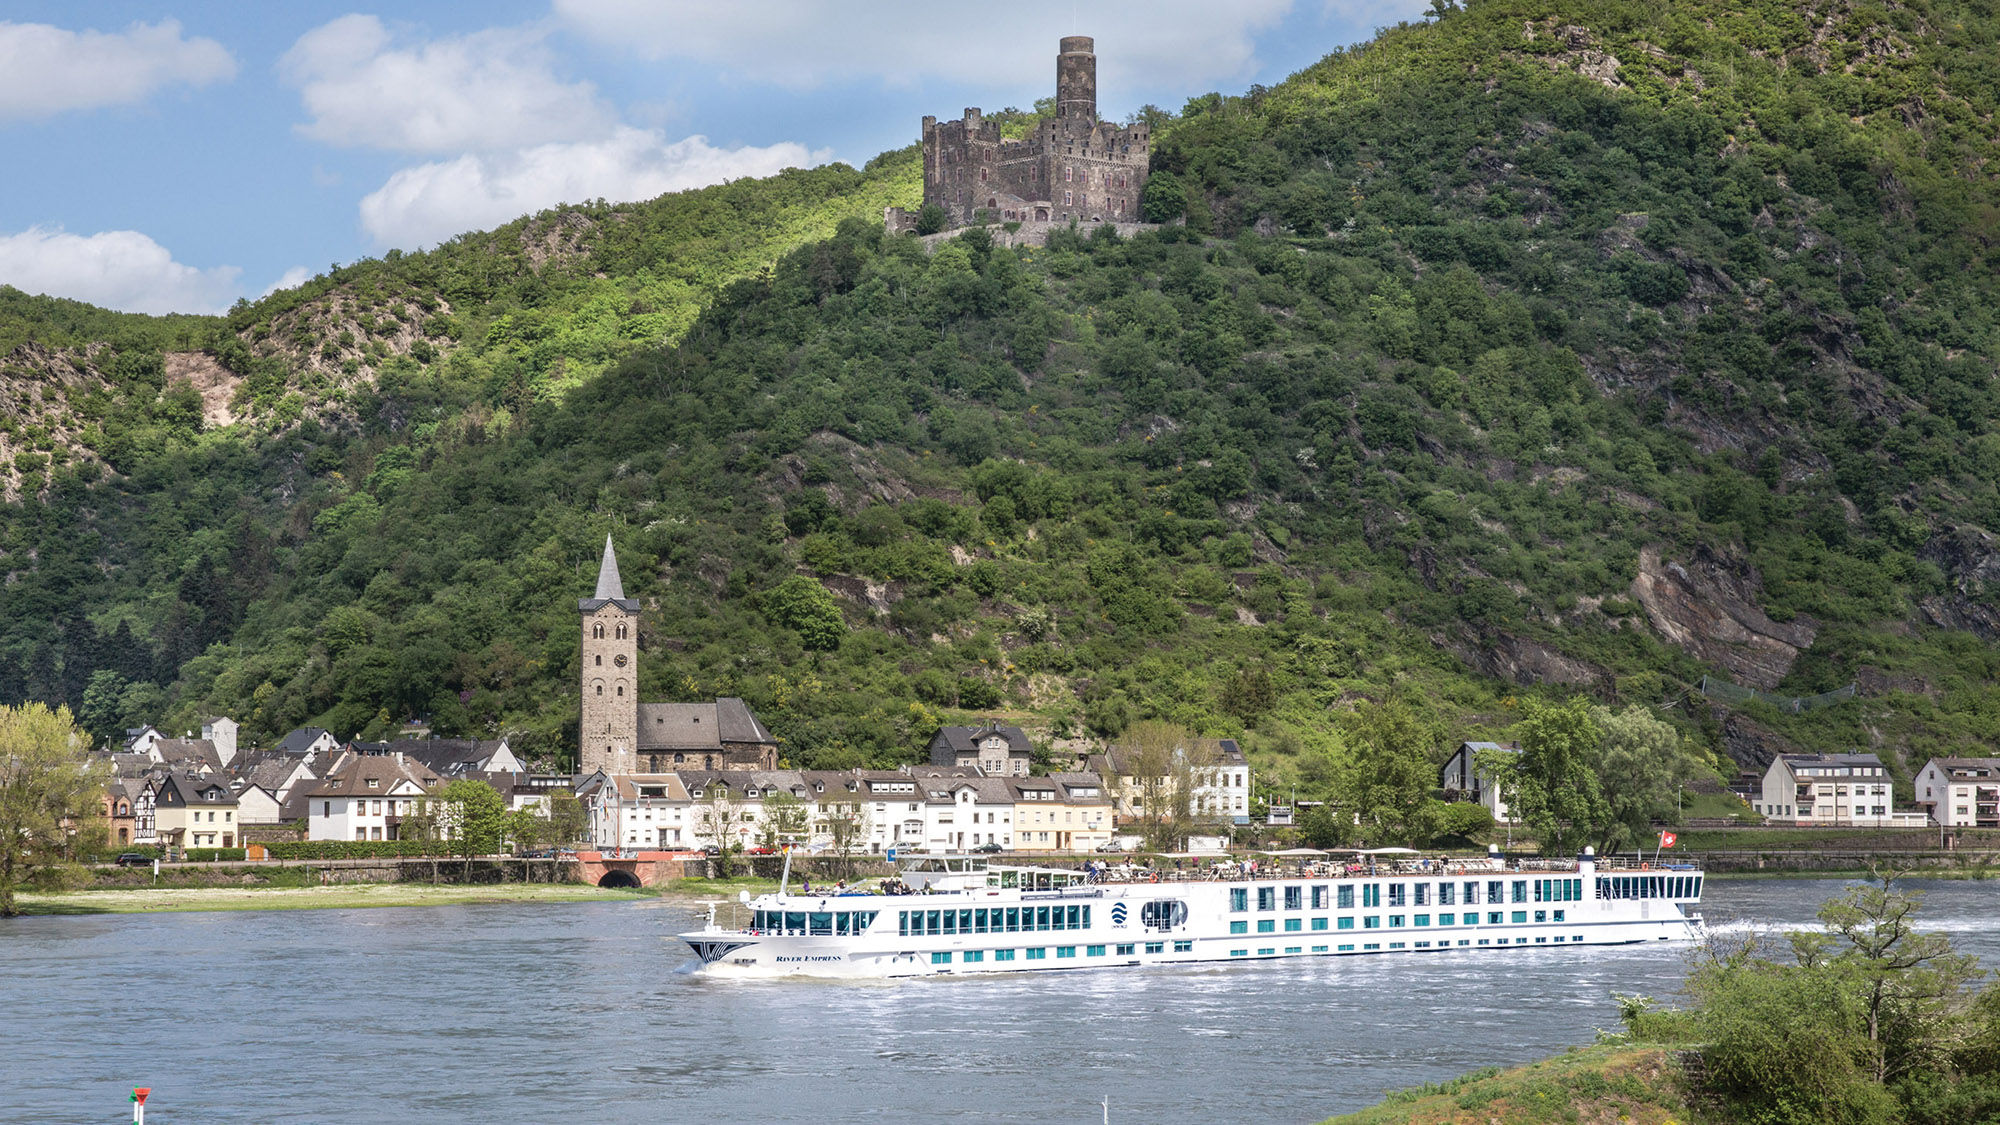 Uniworld's River Empress will host Dutch Delights and Remarkable Rhine & Historic Holland itineraries that include a visit to the horticultural extravaganza.